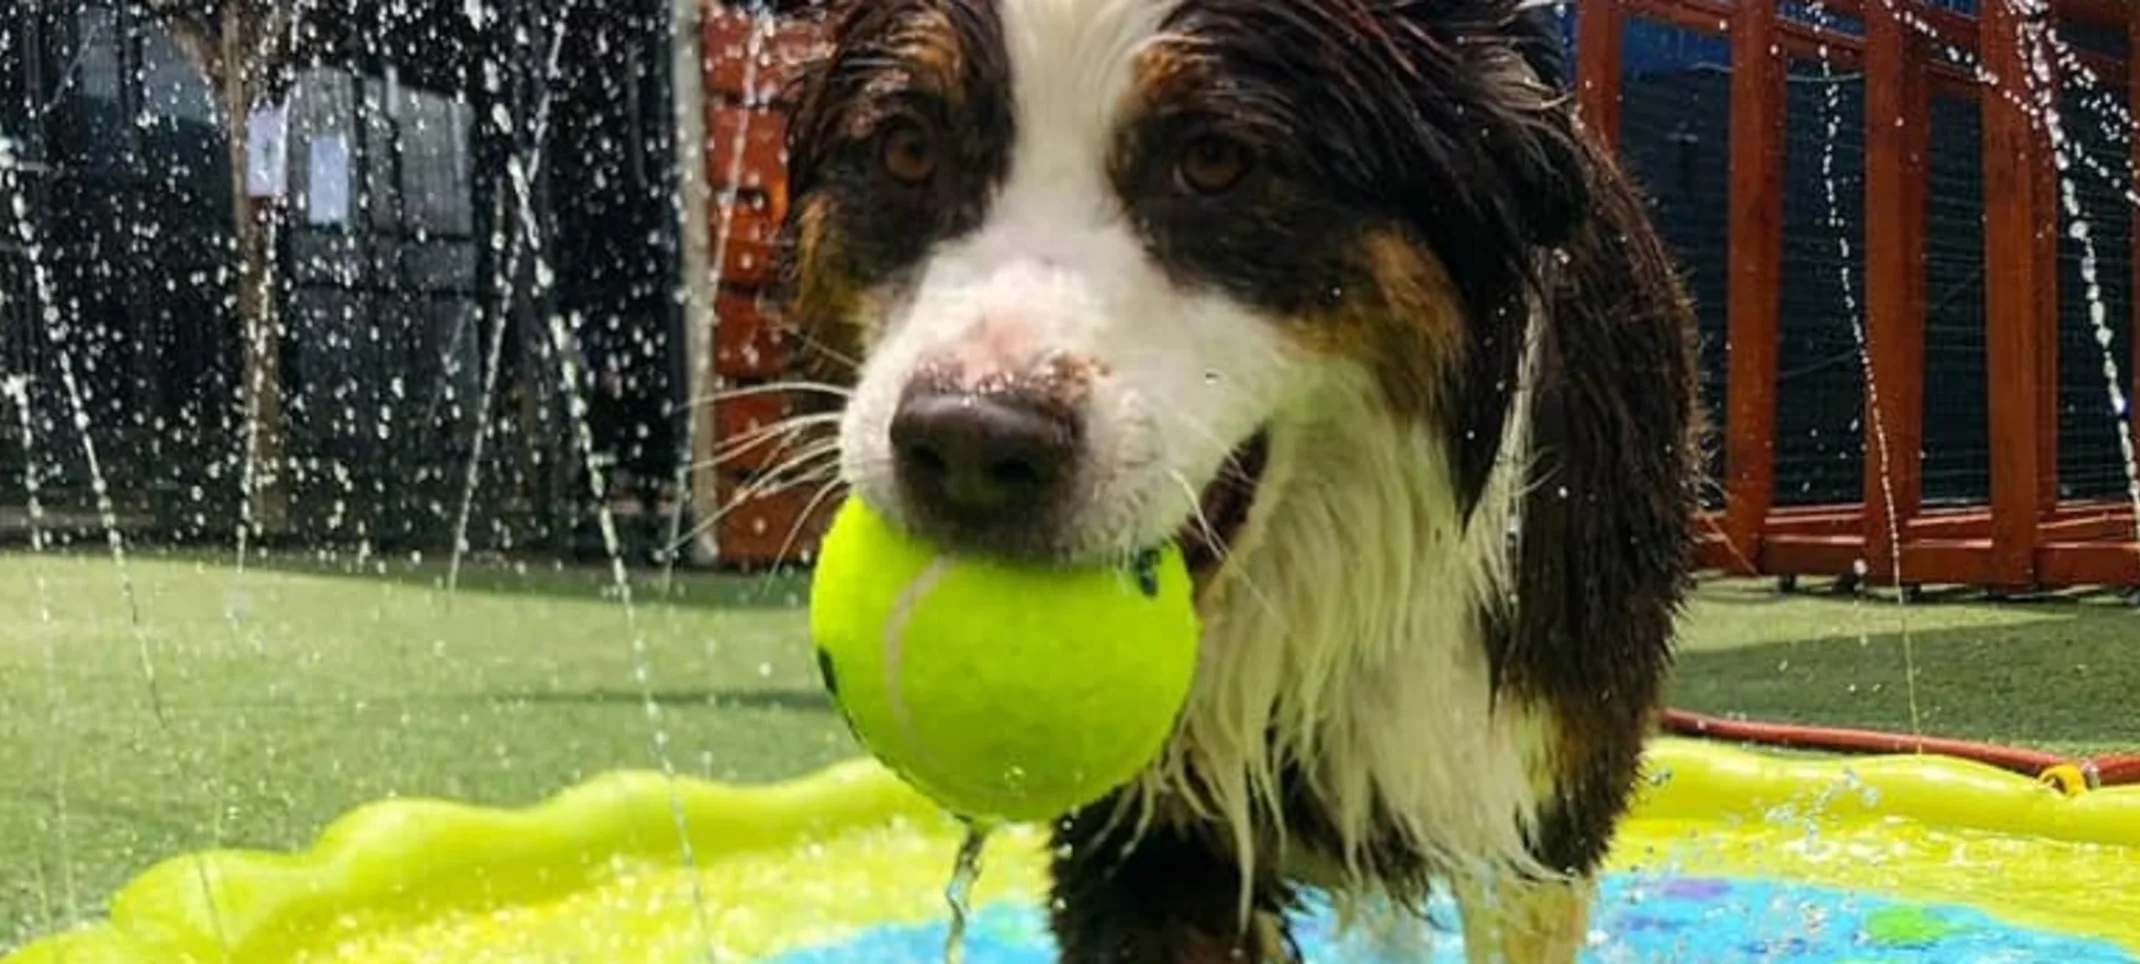 Dog playing in water with ball